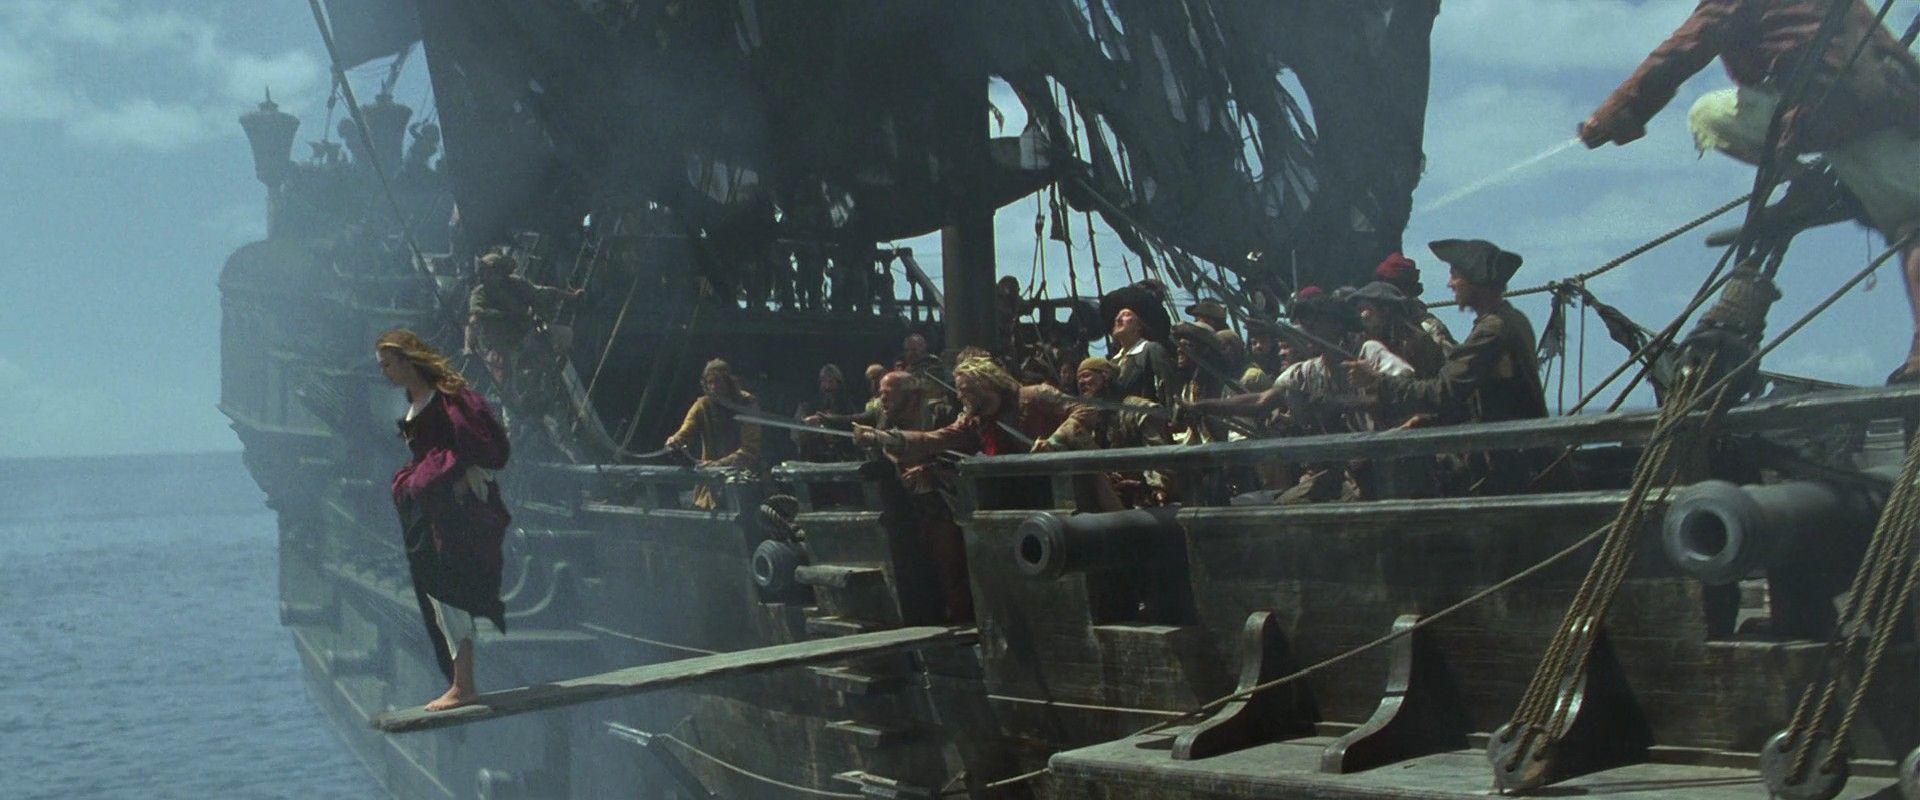 1910x1227px Pirates Of The Caribbean Black Pearl 1411.65